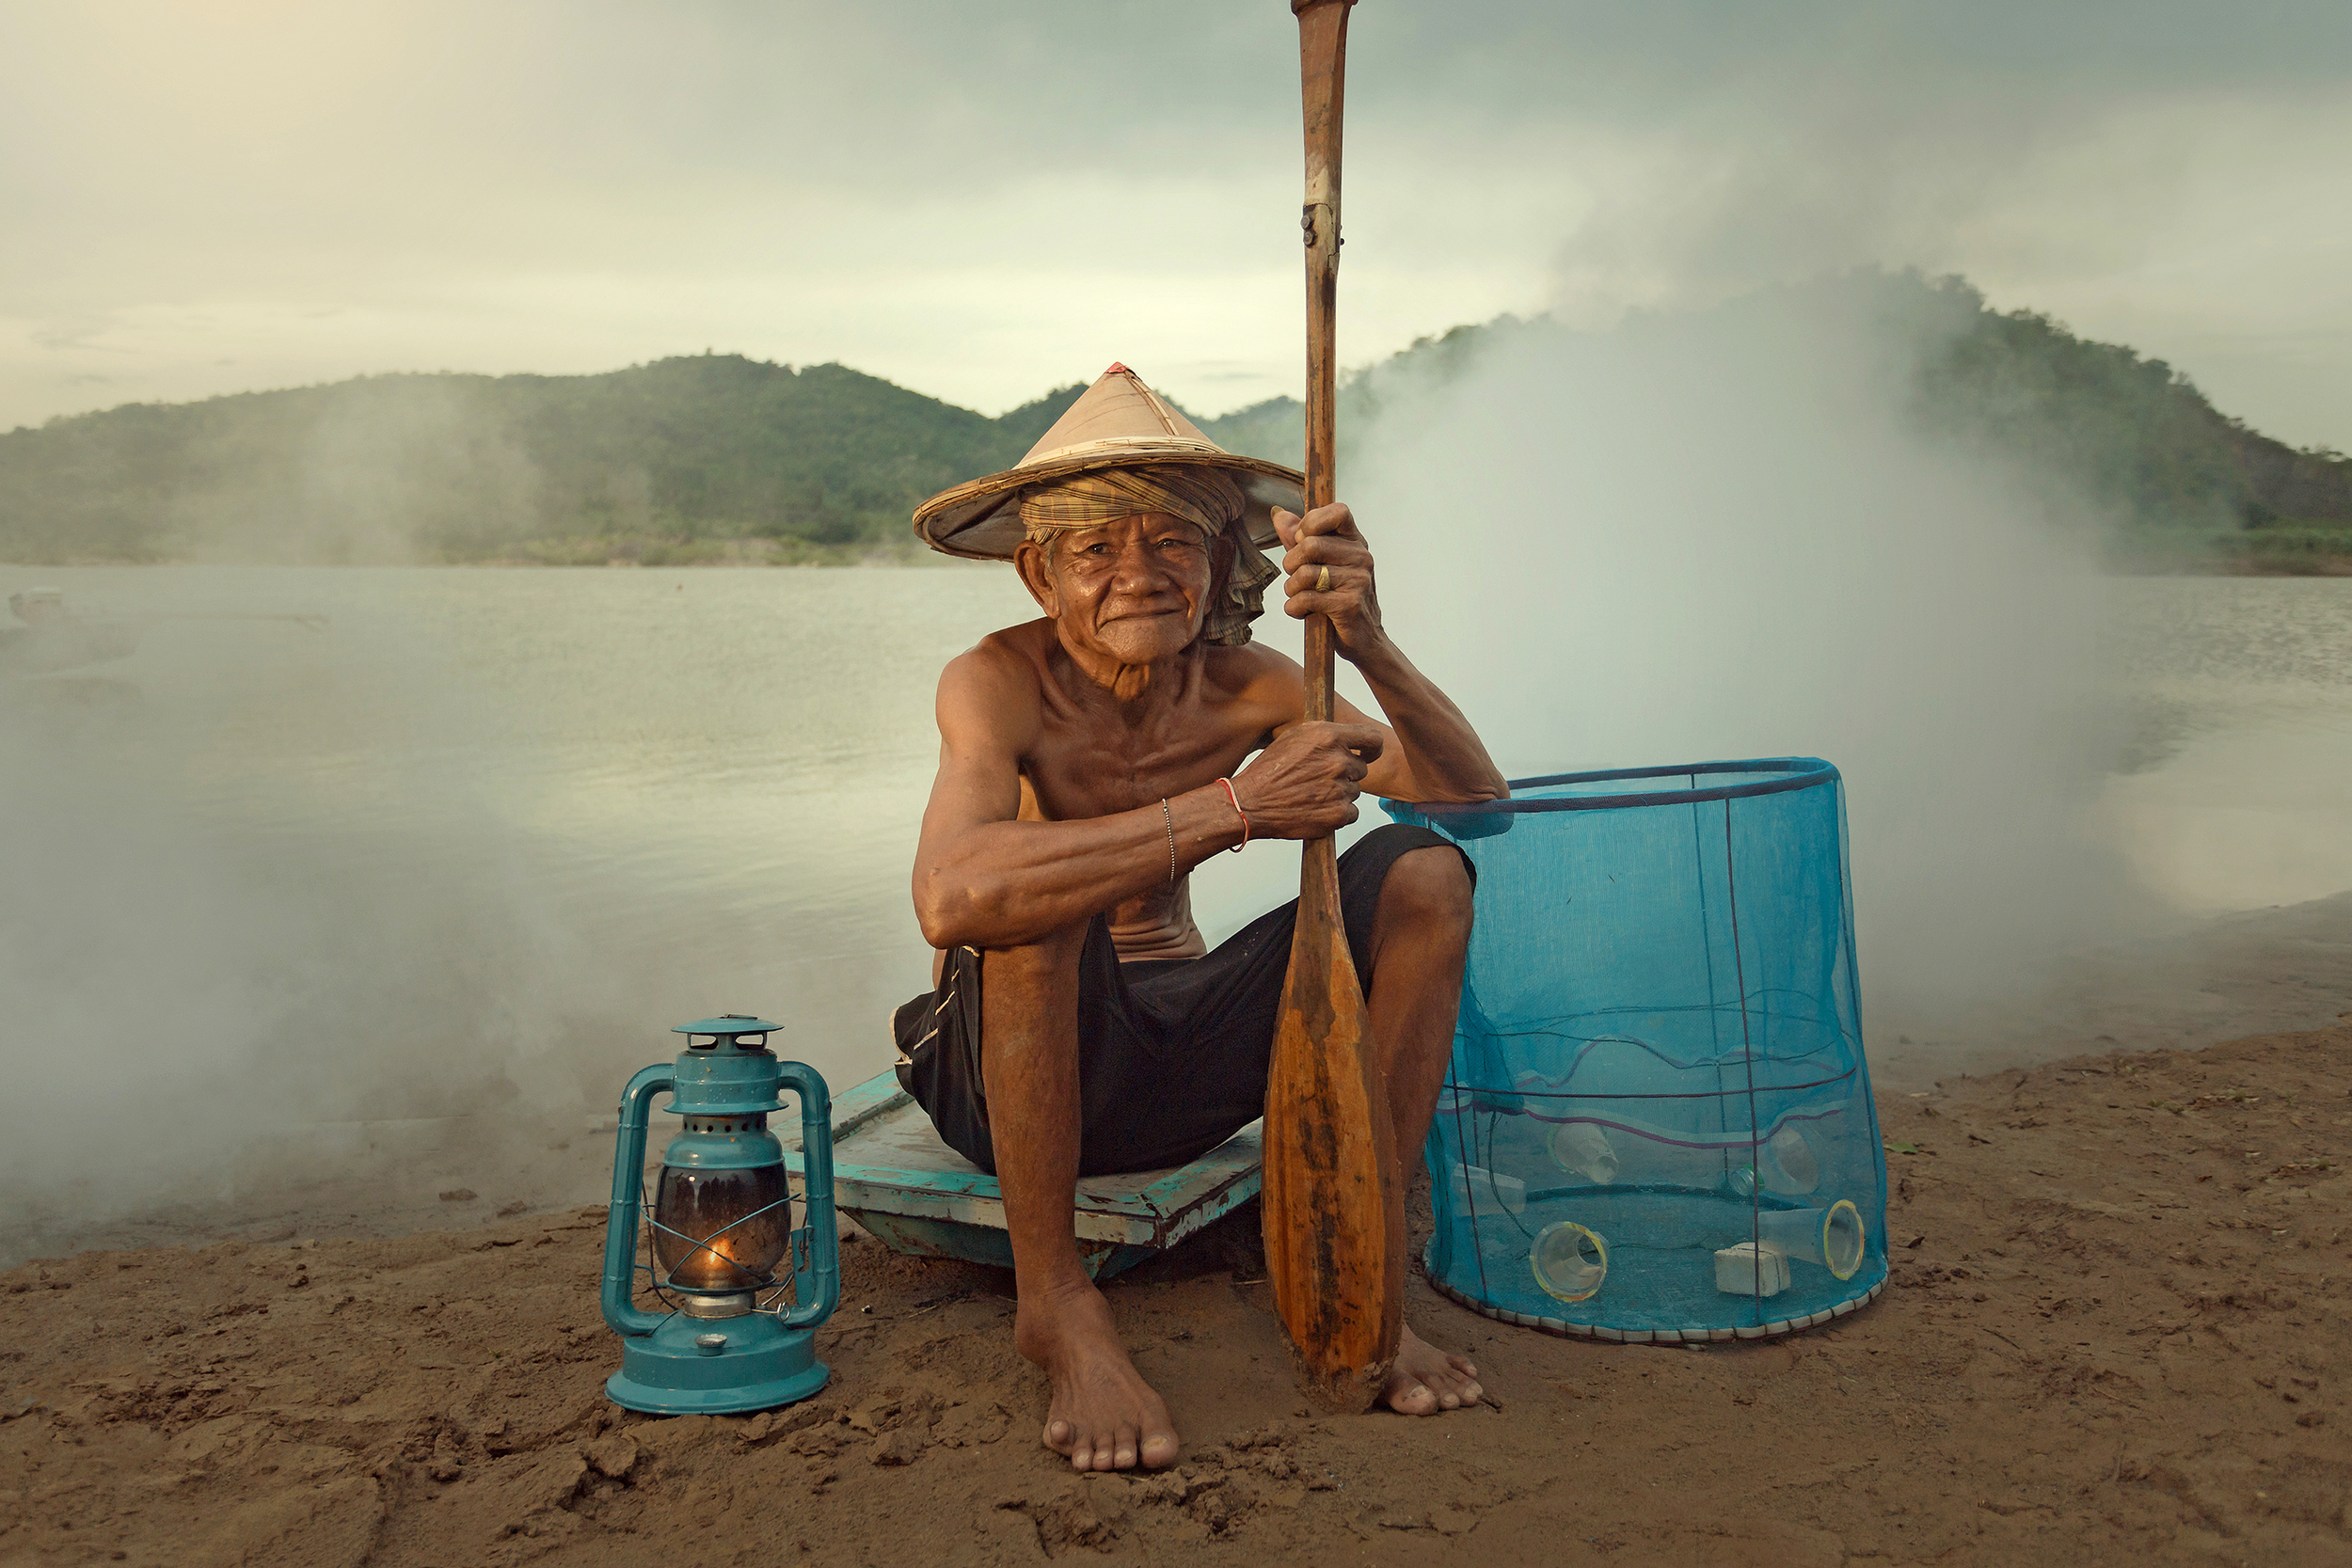 A local fisherman sitting on the ground